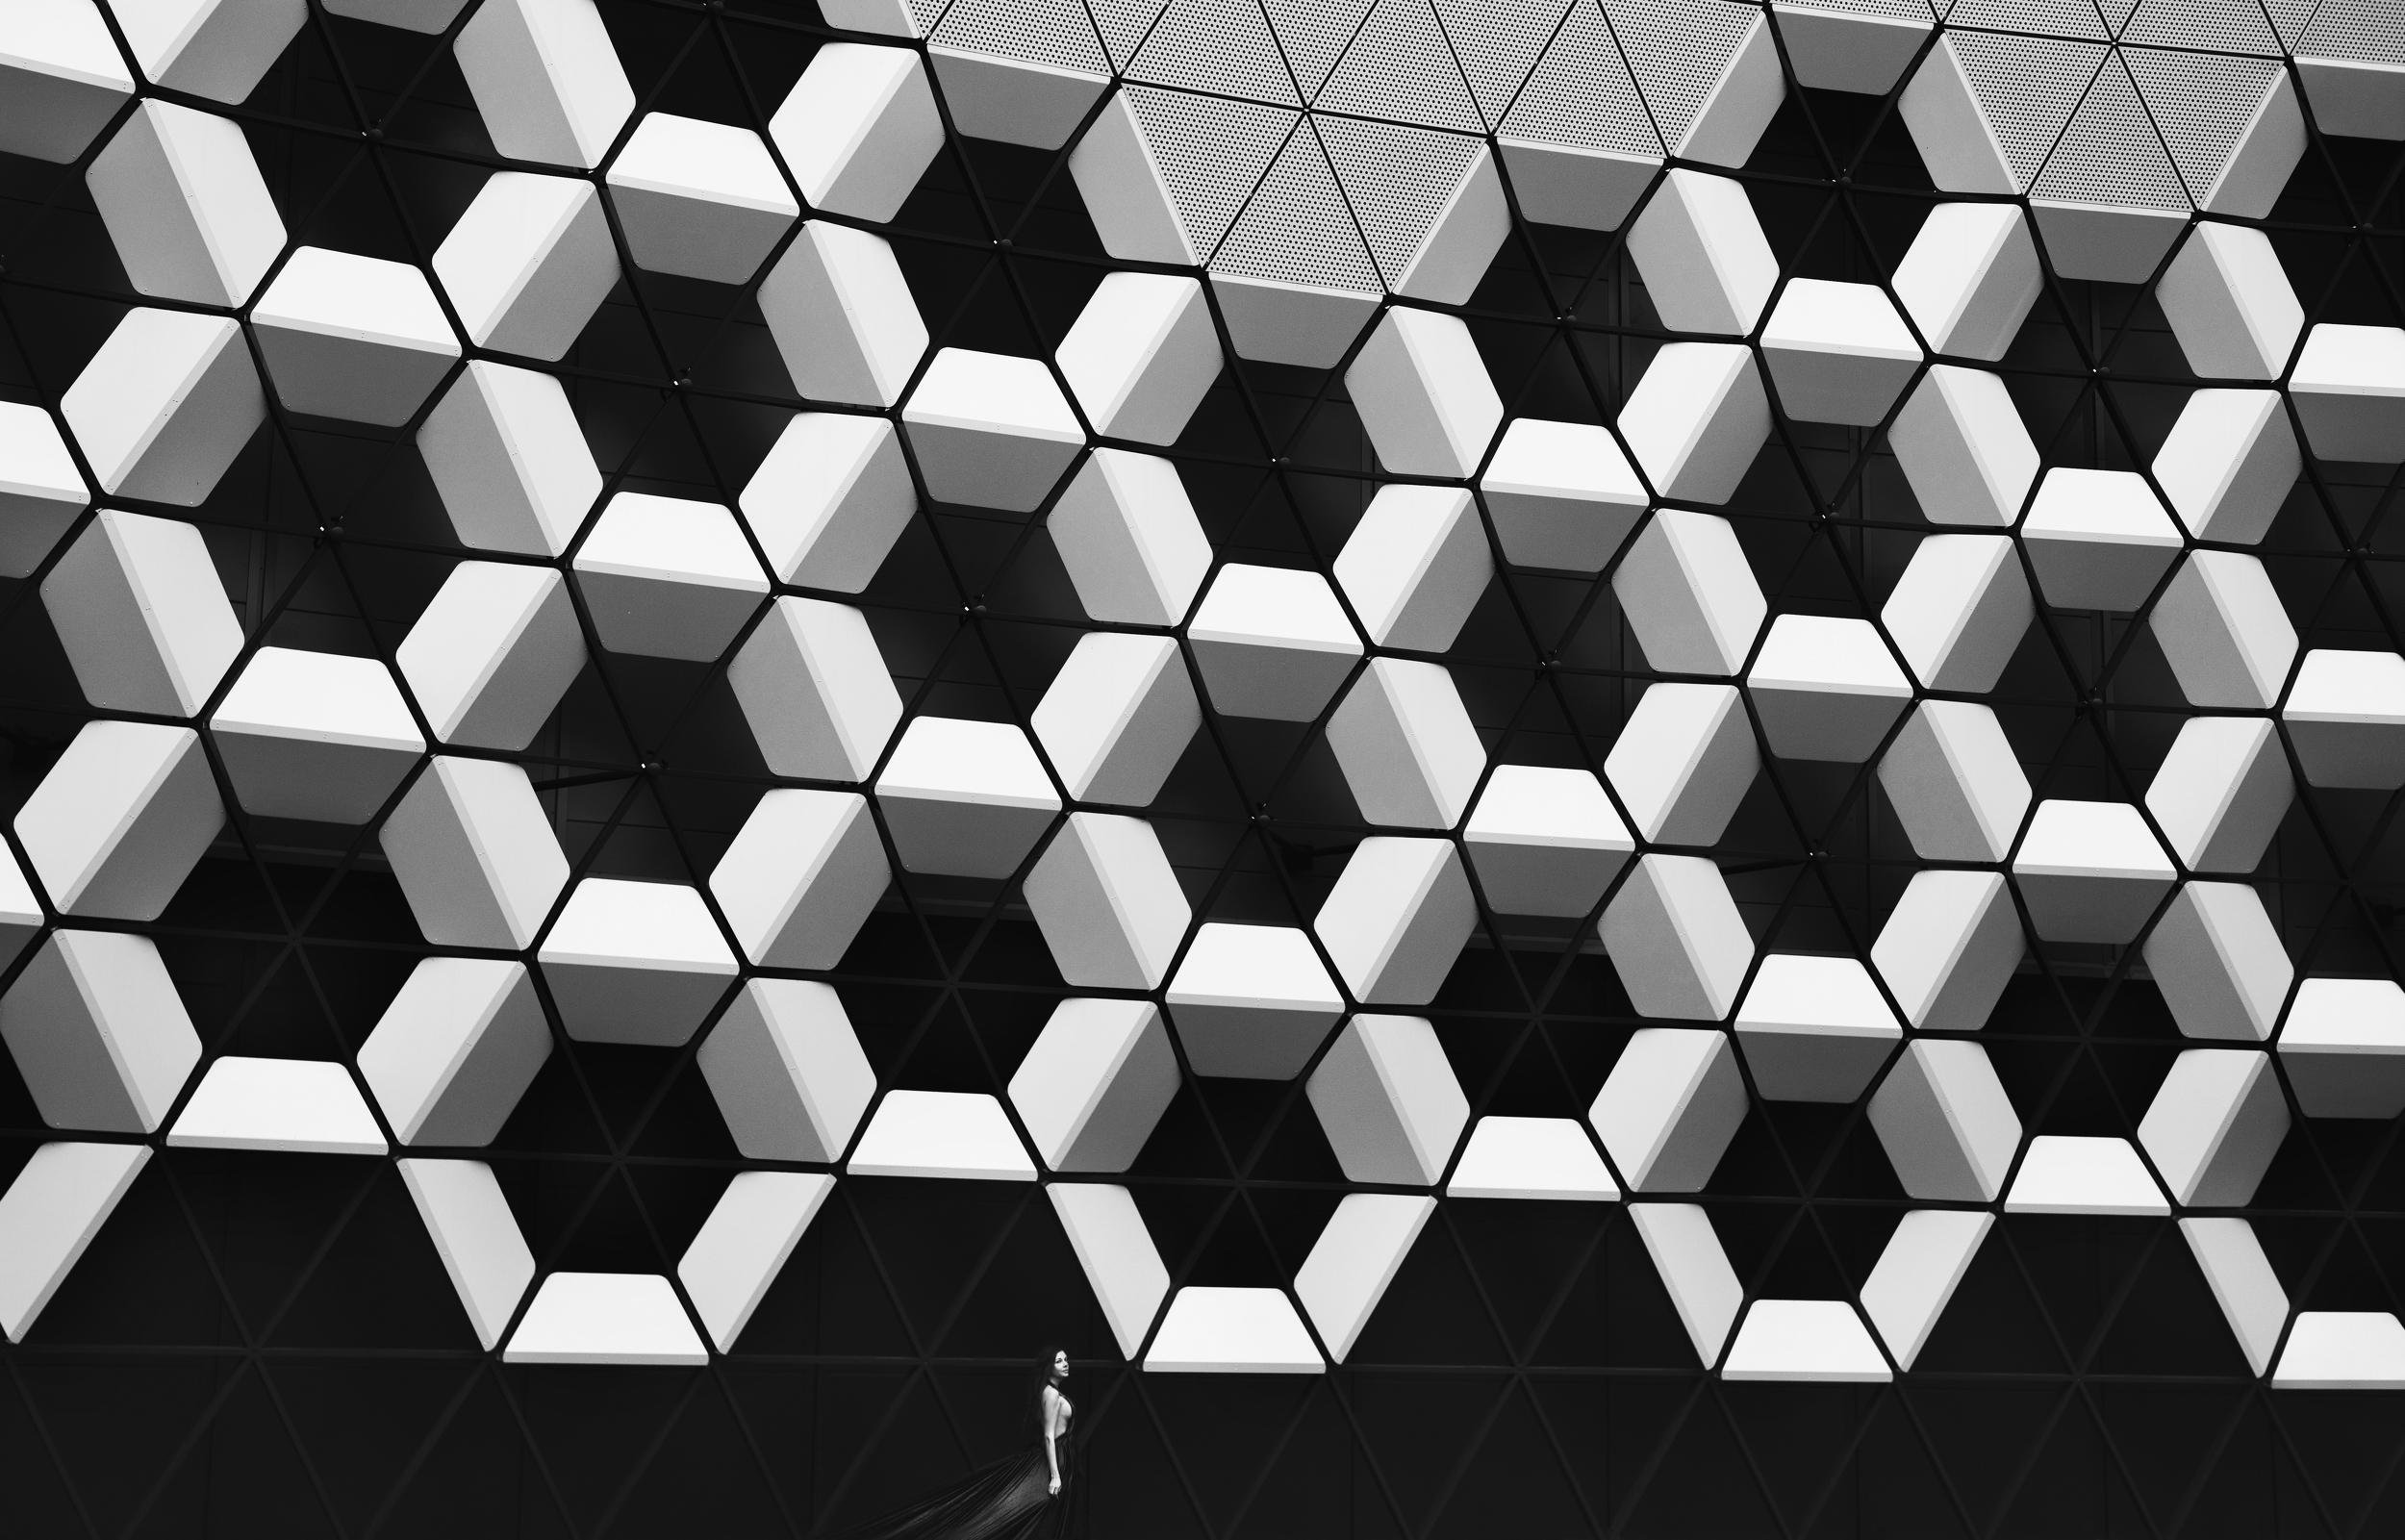 Abstract Geometry Pattern Photography Monochrome Women Model Hexagon Architecture Triangle Mary Buda 2500x1601